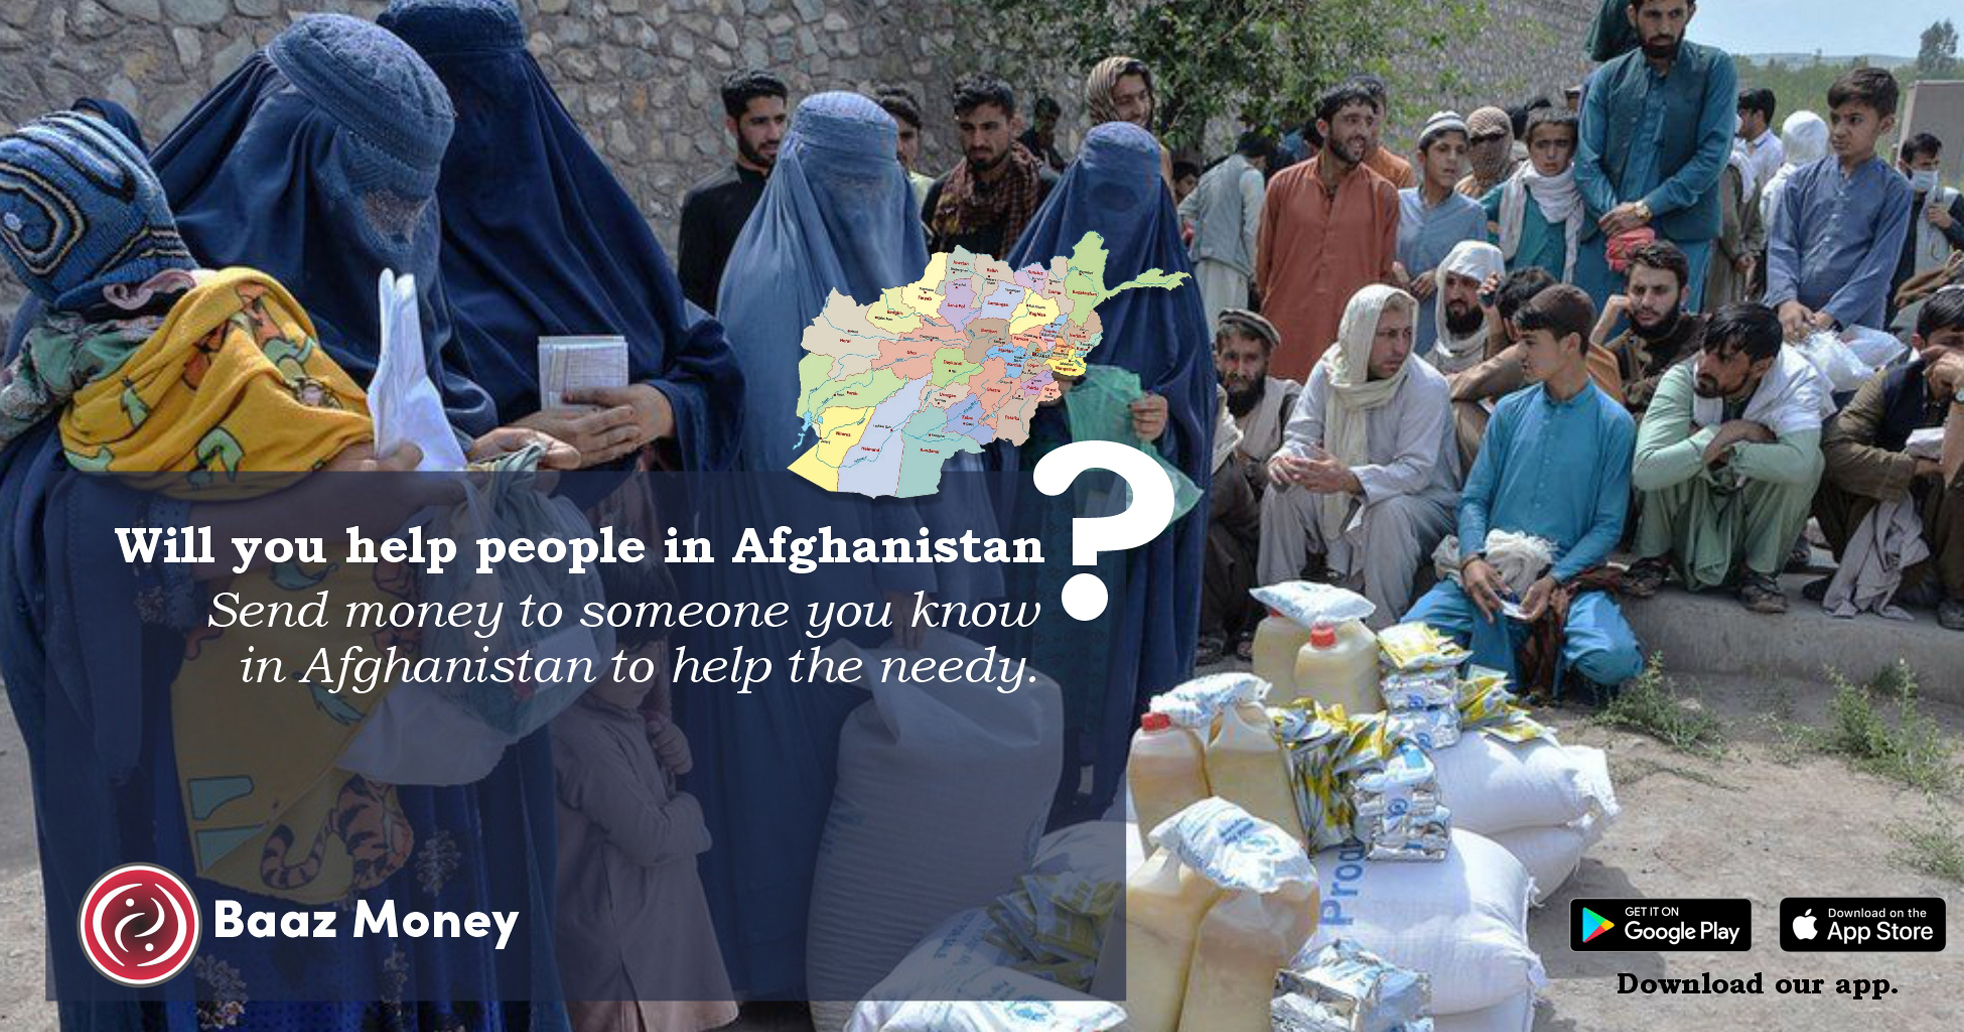 Will you help people in Afghanistan?